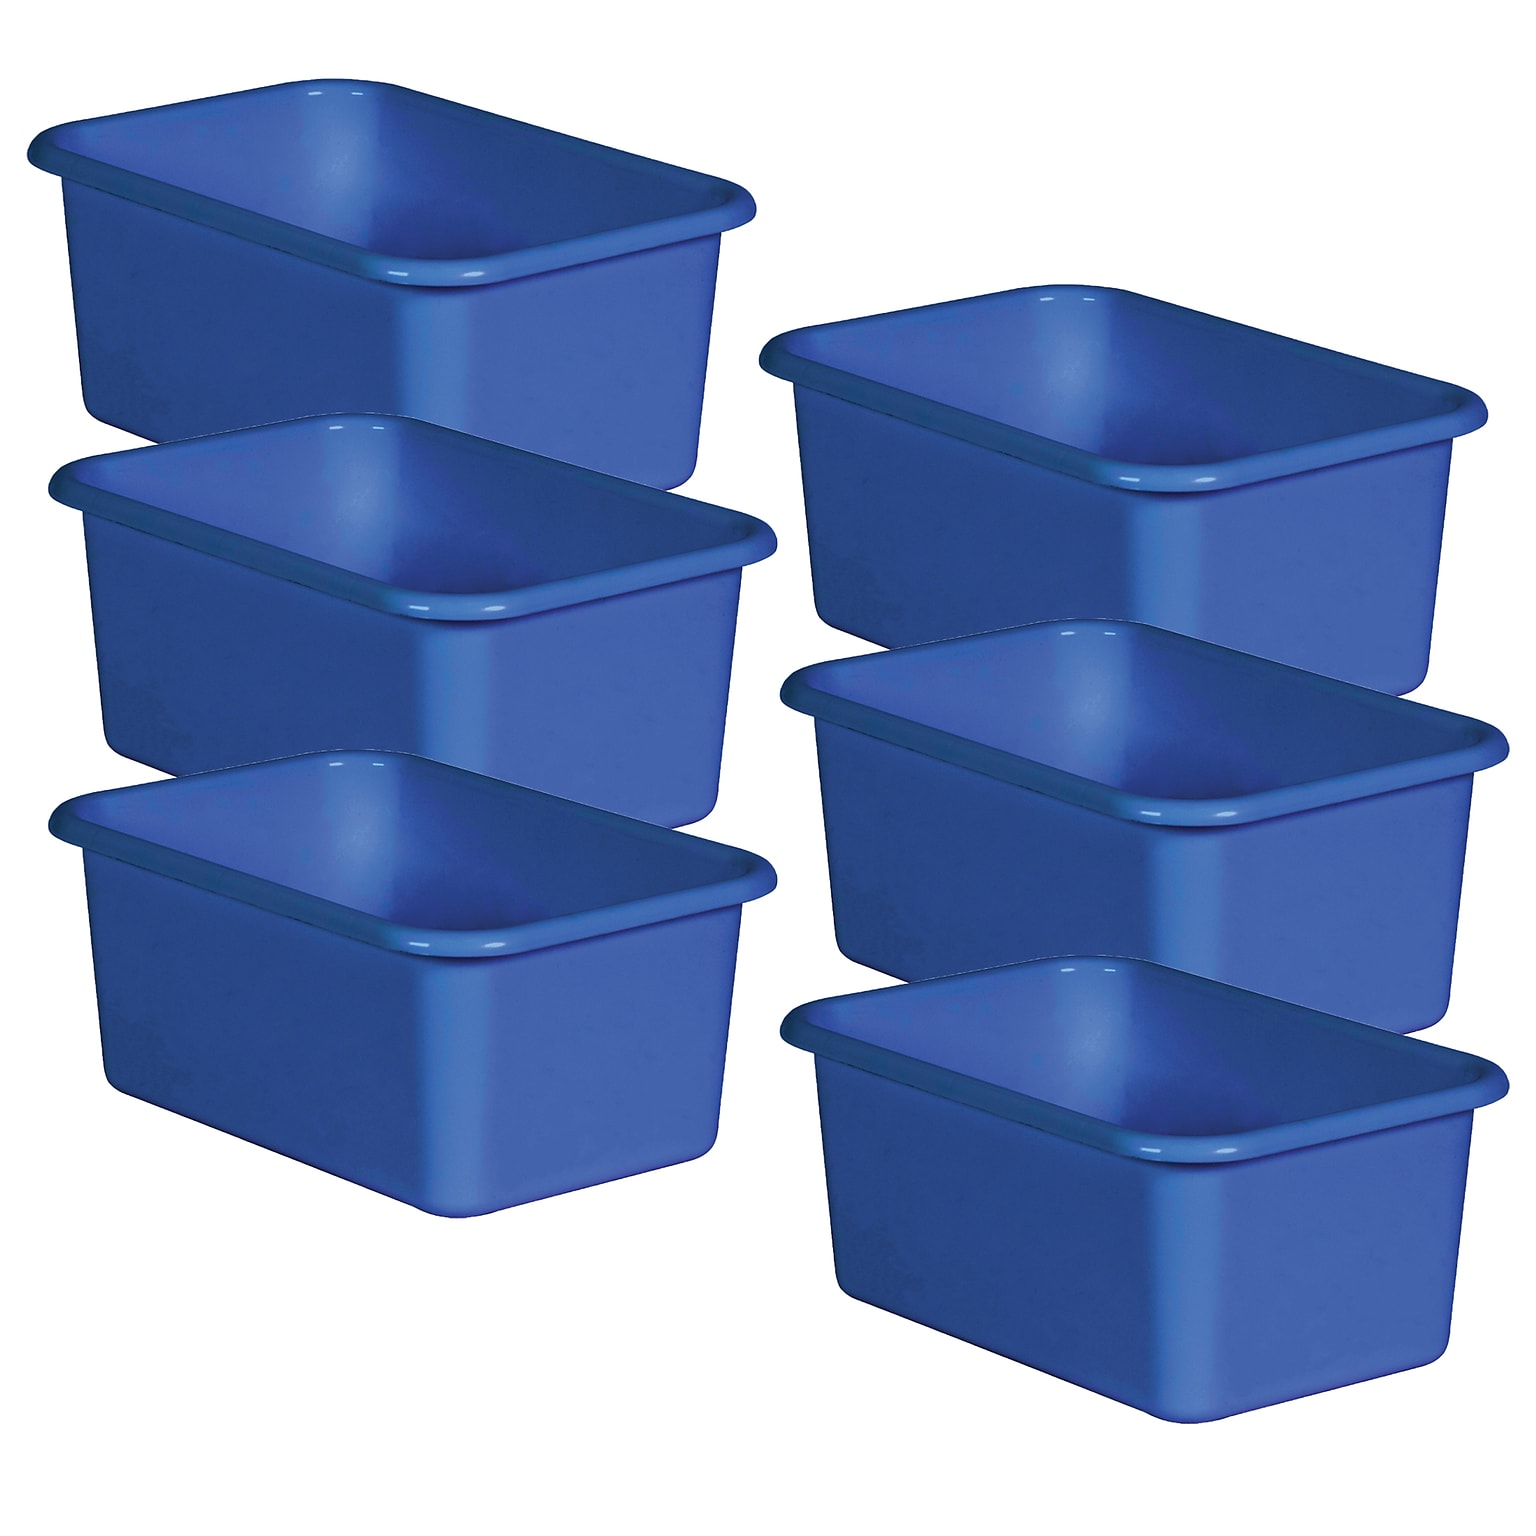 Teacher Created Resources® Plastic Storage Bin, Small, 7.75 x 11.38 x 5 , Blue, Pack of 6 (TCR20393-6)